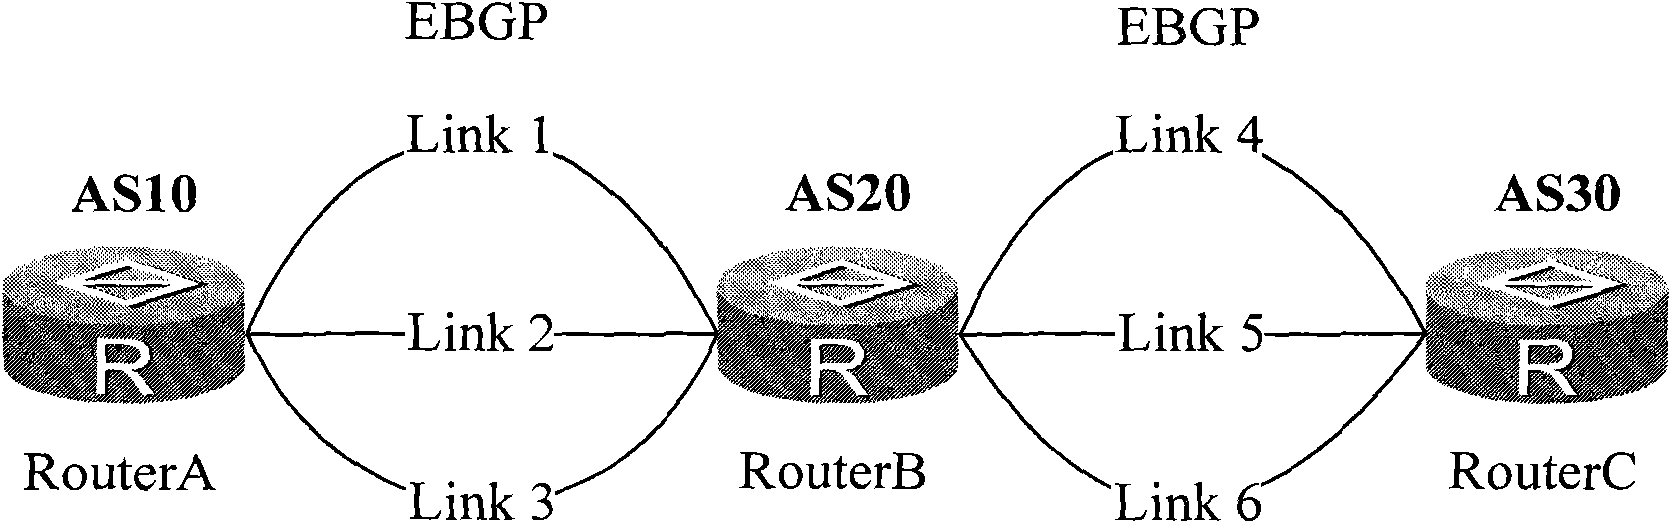 Route advertising method and device among direct-connecting EBGP neighbors